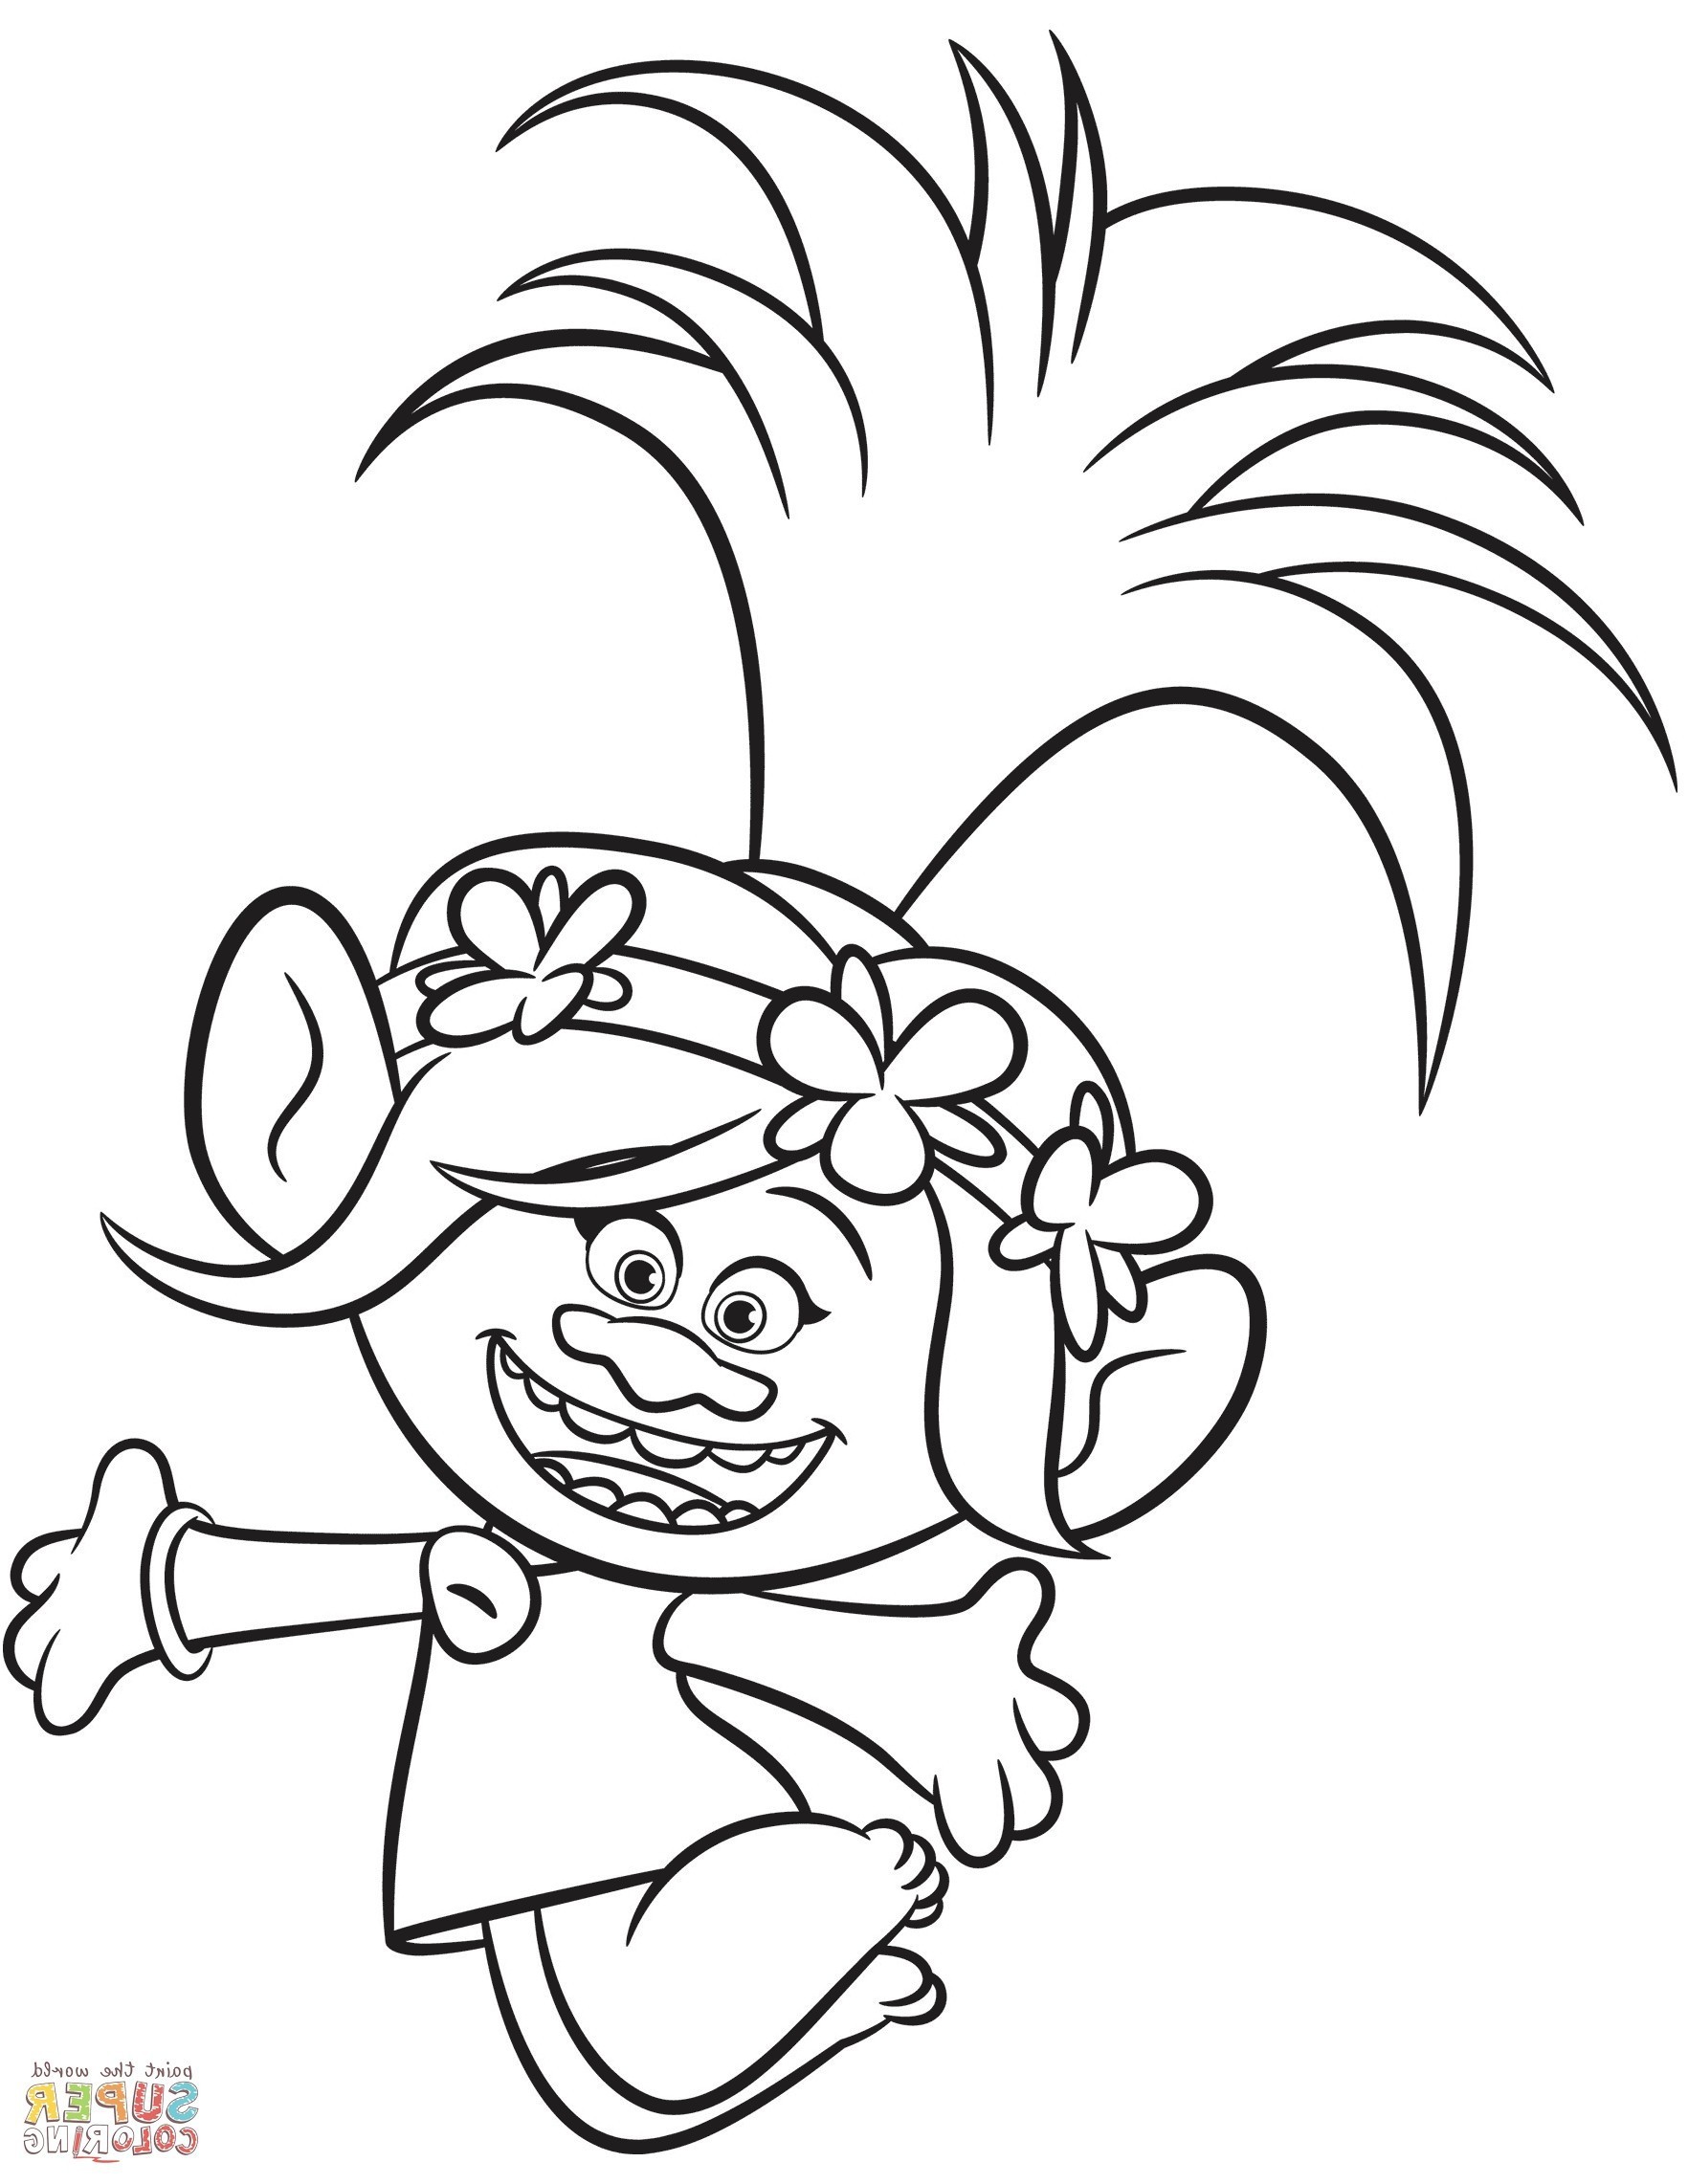 Poppy The Troll Coloring Page